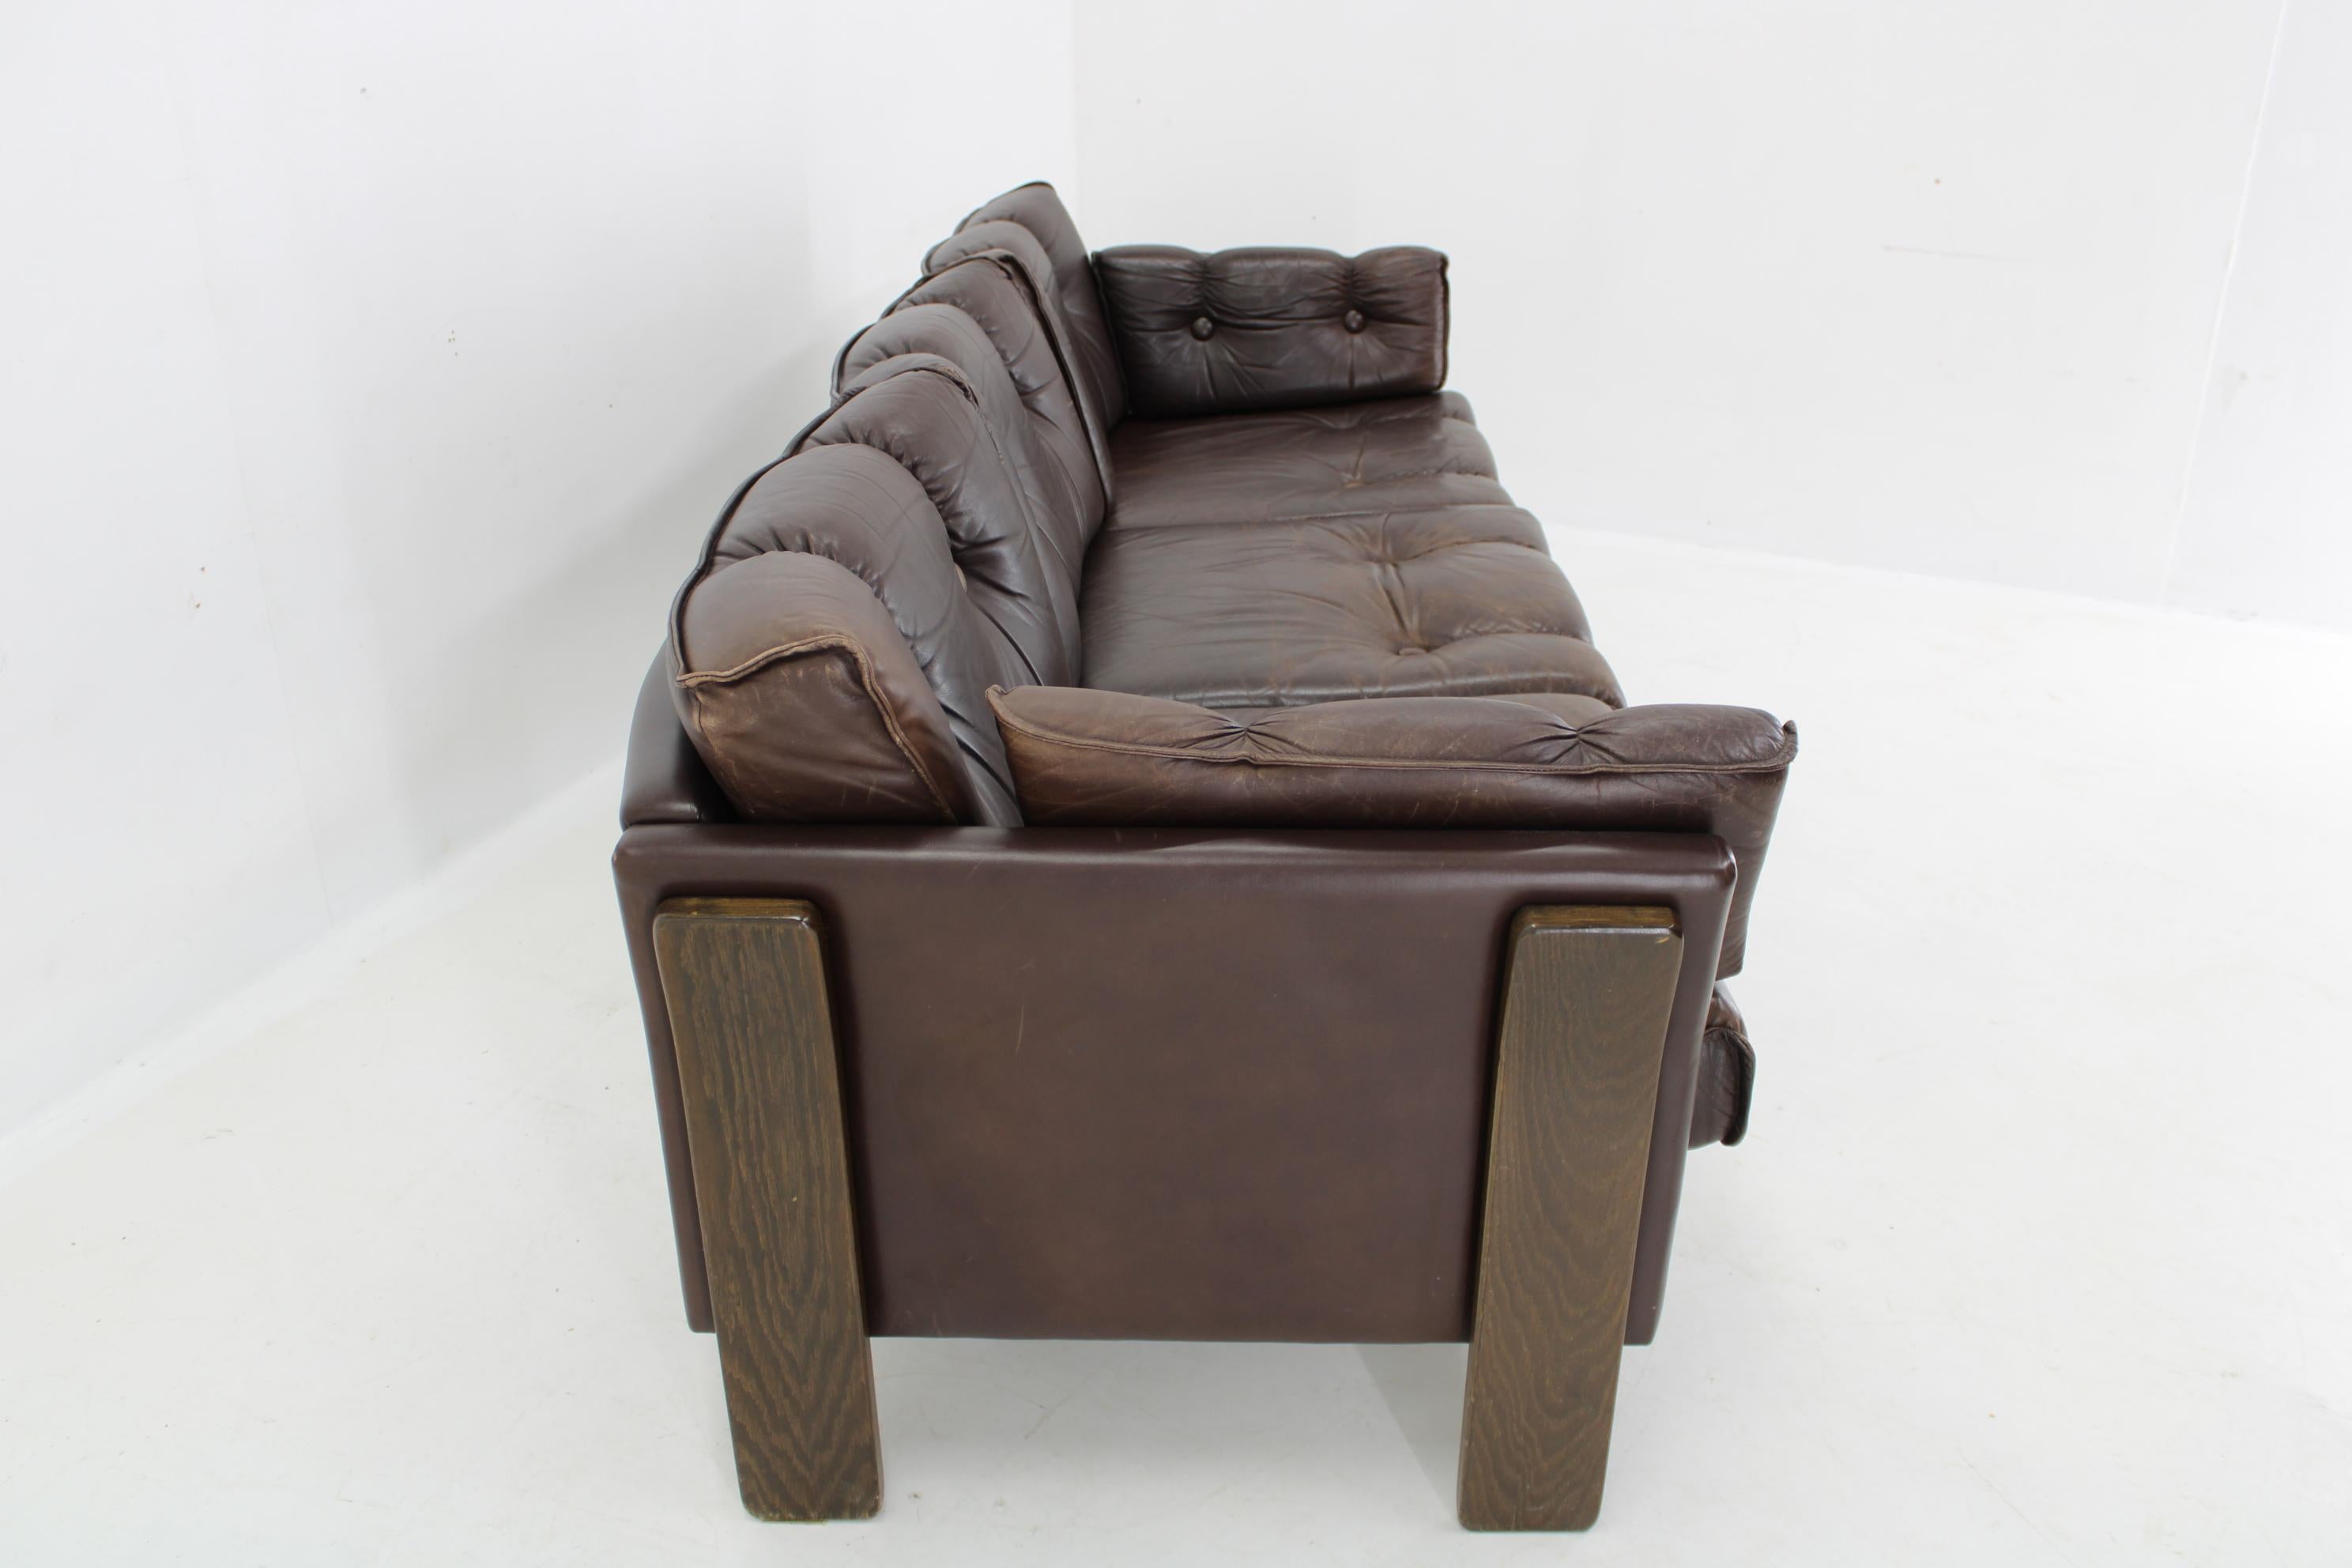 1970s Brown Leather 3-Seater Sofa, Denmark For Sale 2